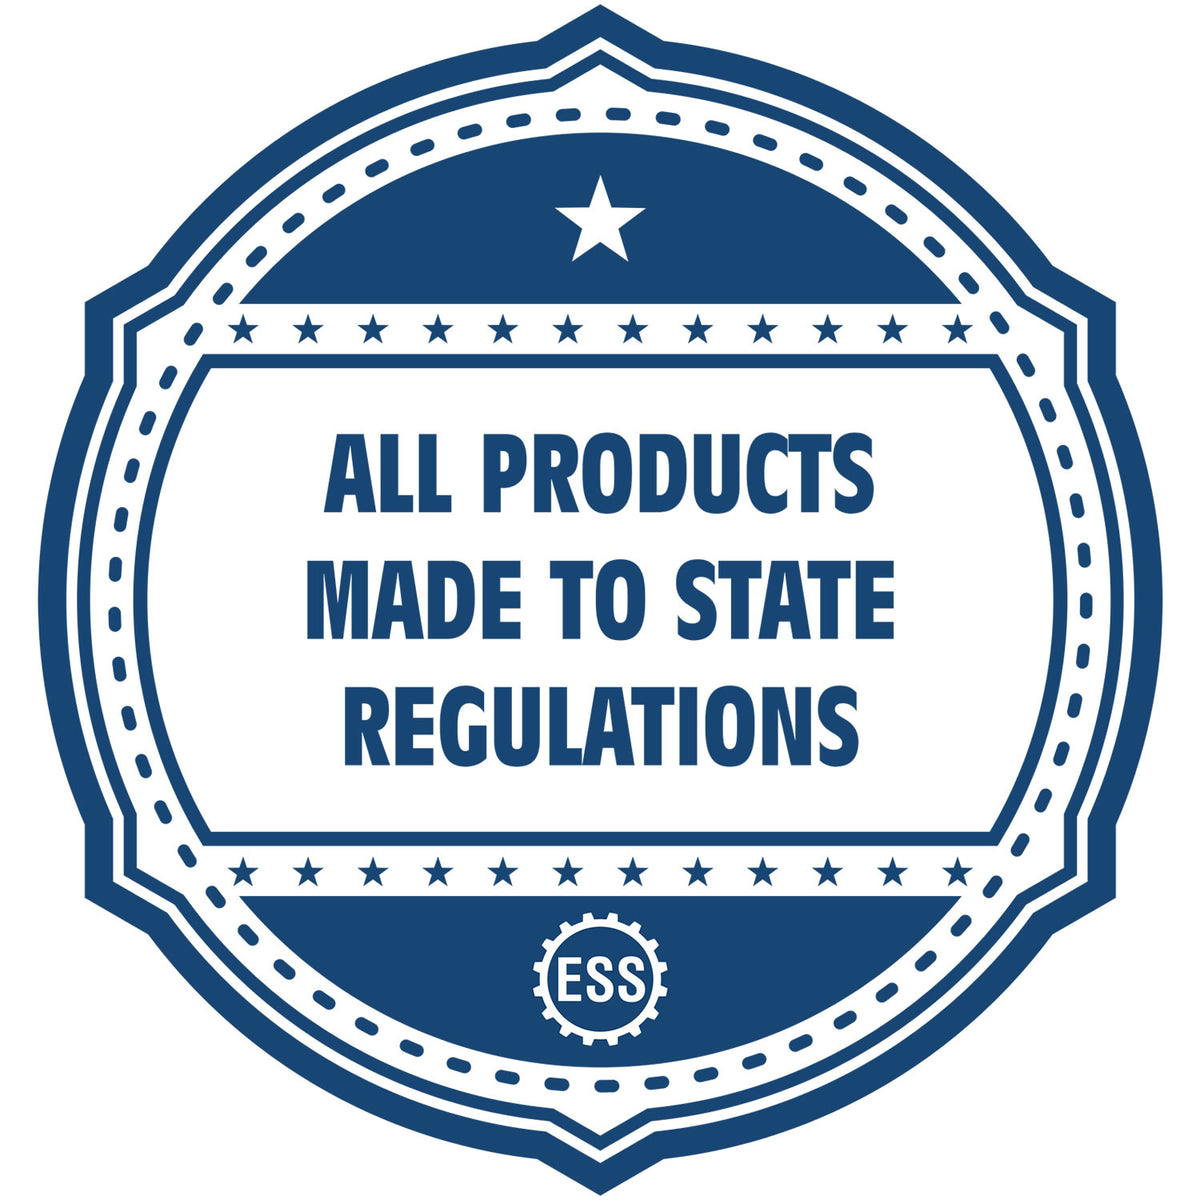 An icon or badge element for the Premium MaxLight Pre-Inked North Carolina Engineering Stamp showing that this product is made in compliance with state regulations.